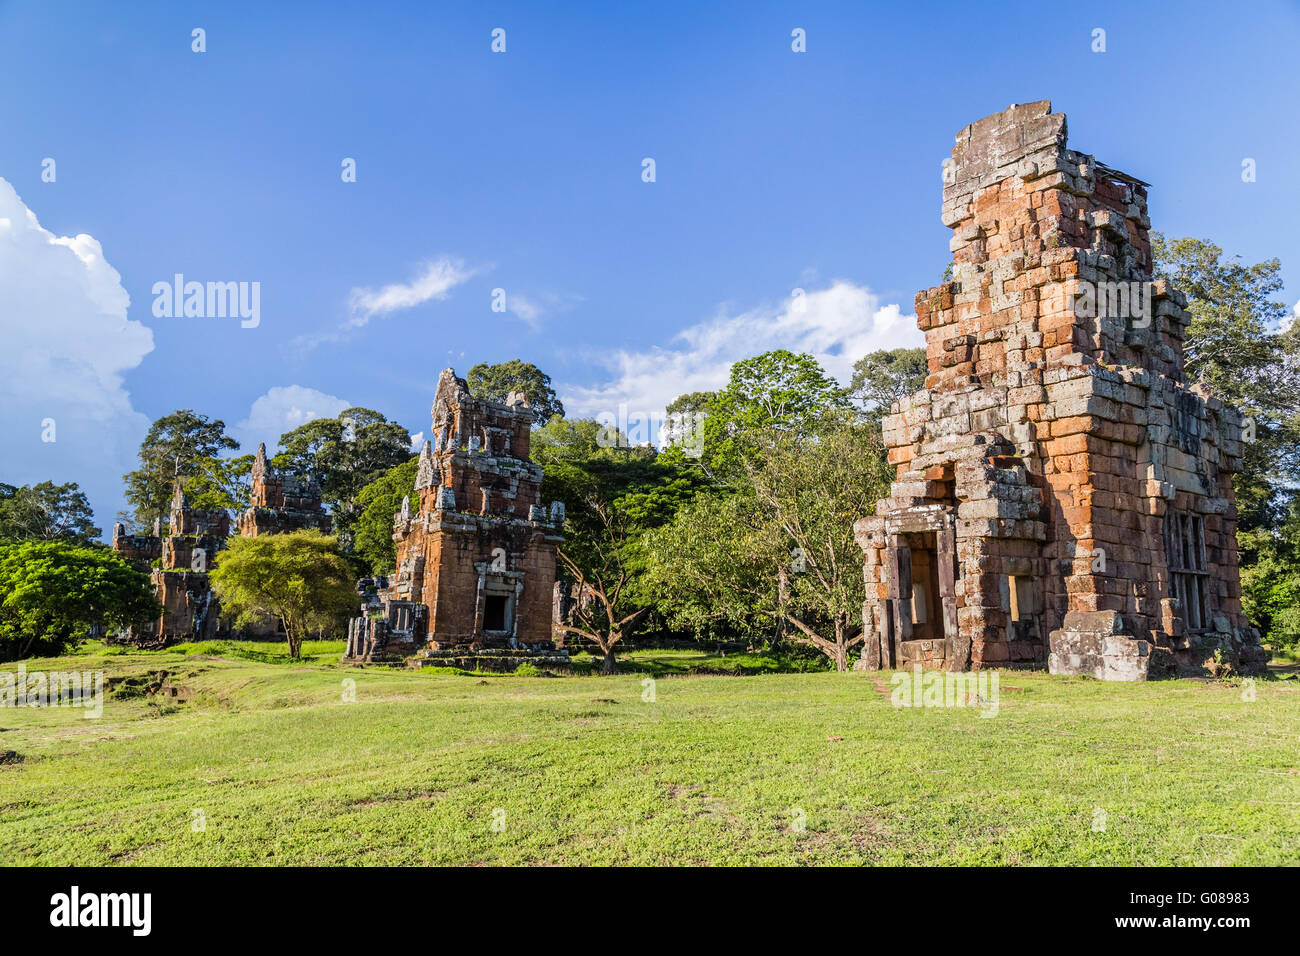 North Khleang tower in Angkor Thom complex Stock Photo